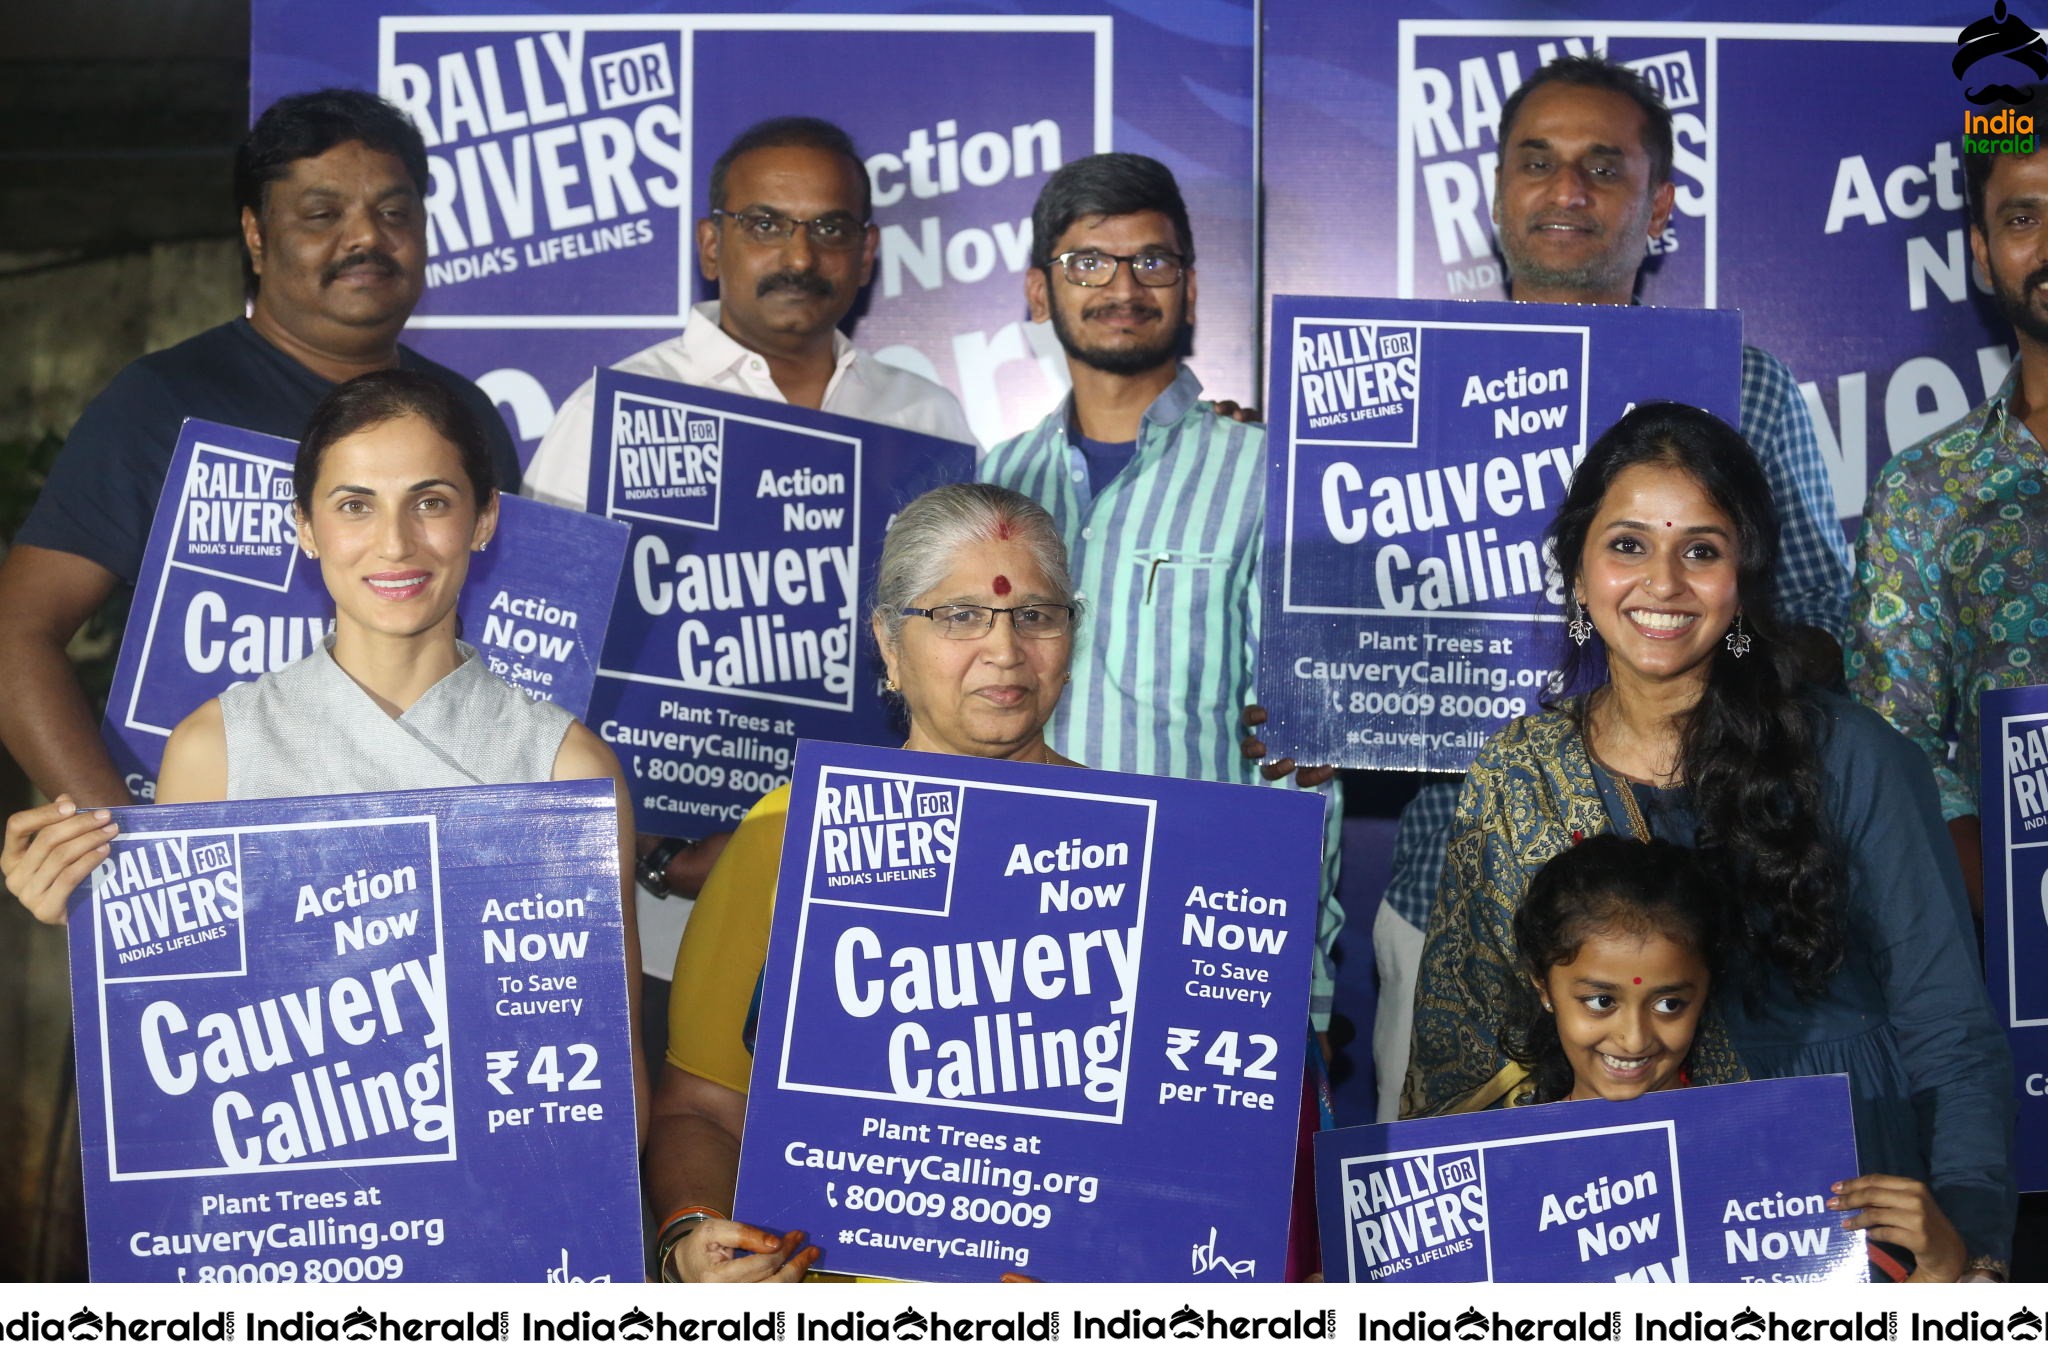 Pop Singer Smita Rally for Rivers Song Launch Set 1